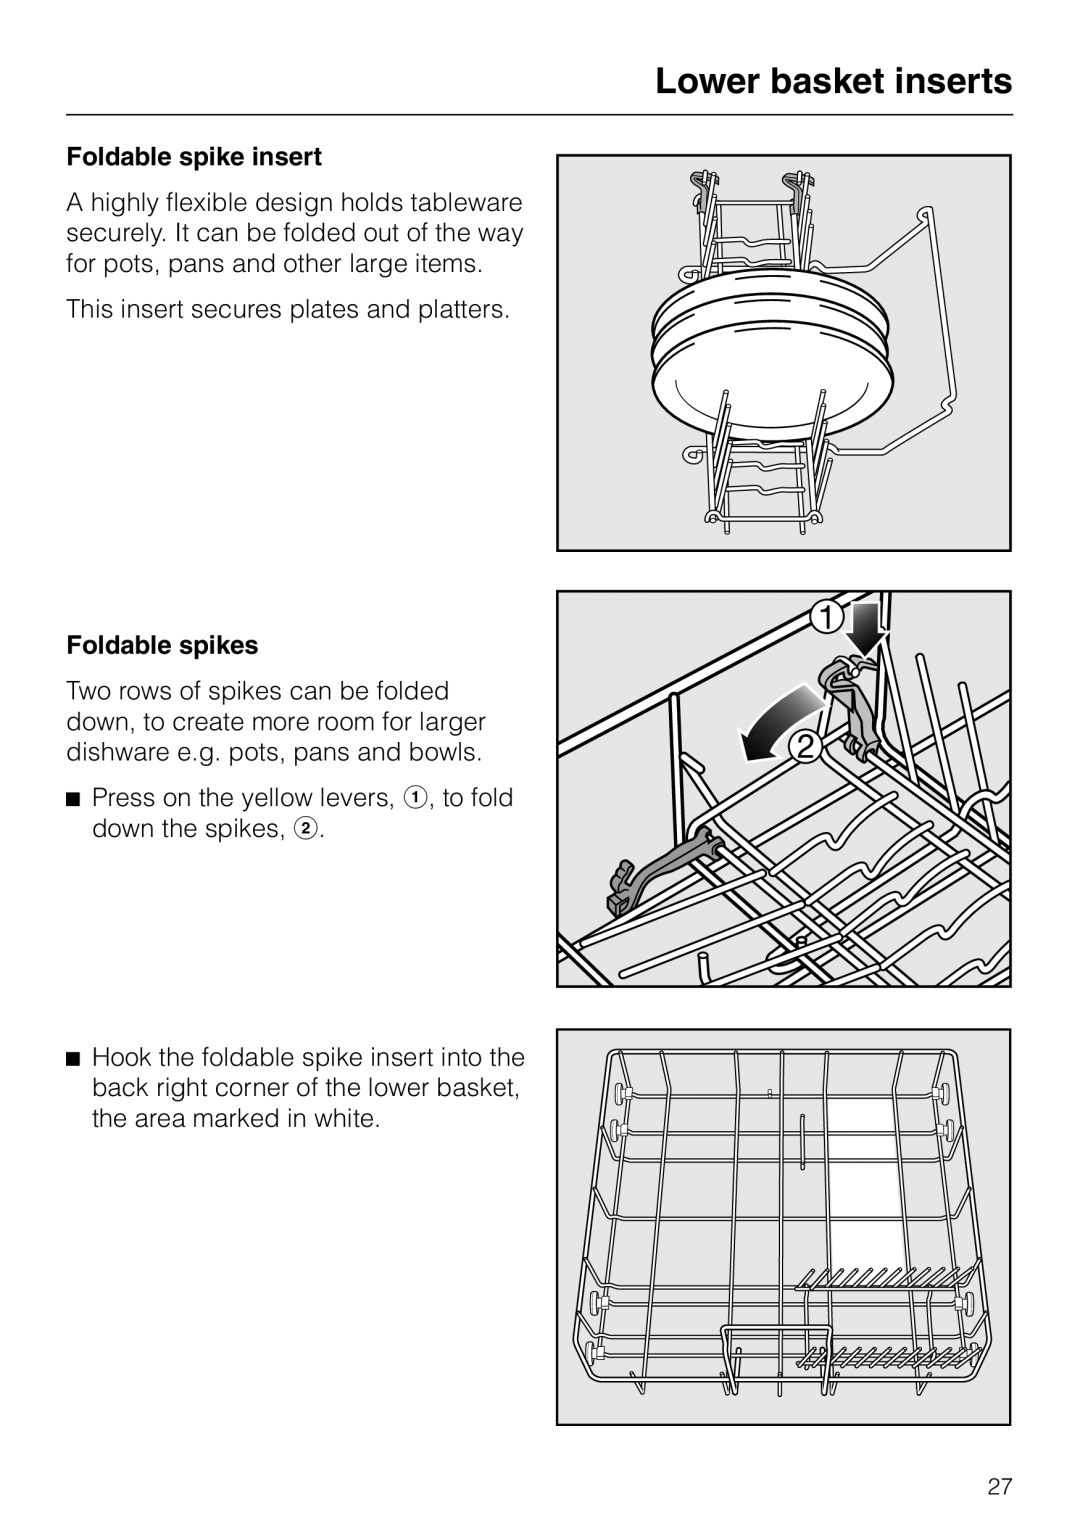 Miele G 851 operating instructions Lower basket inserts, Foldable spike insert, Foldable spikes 